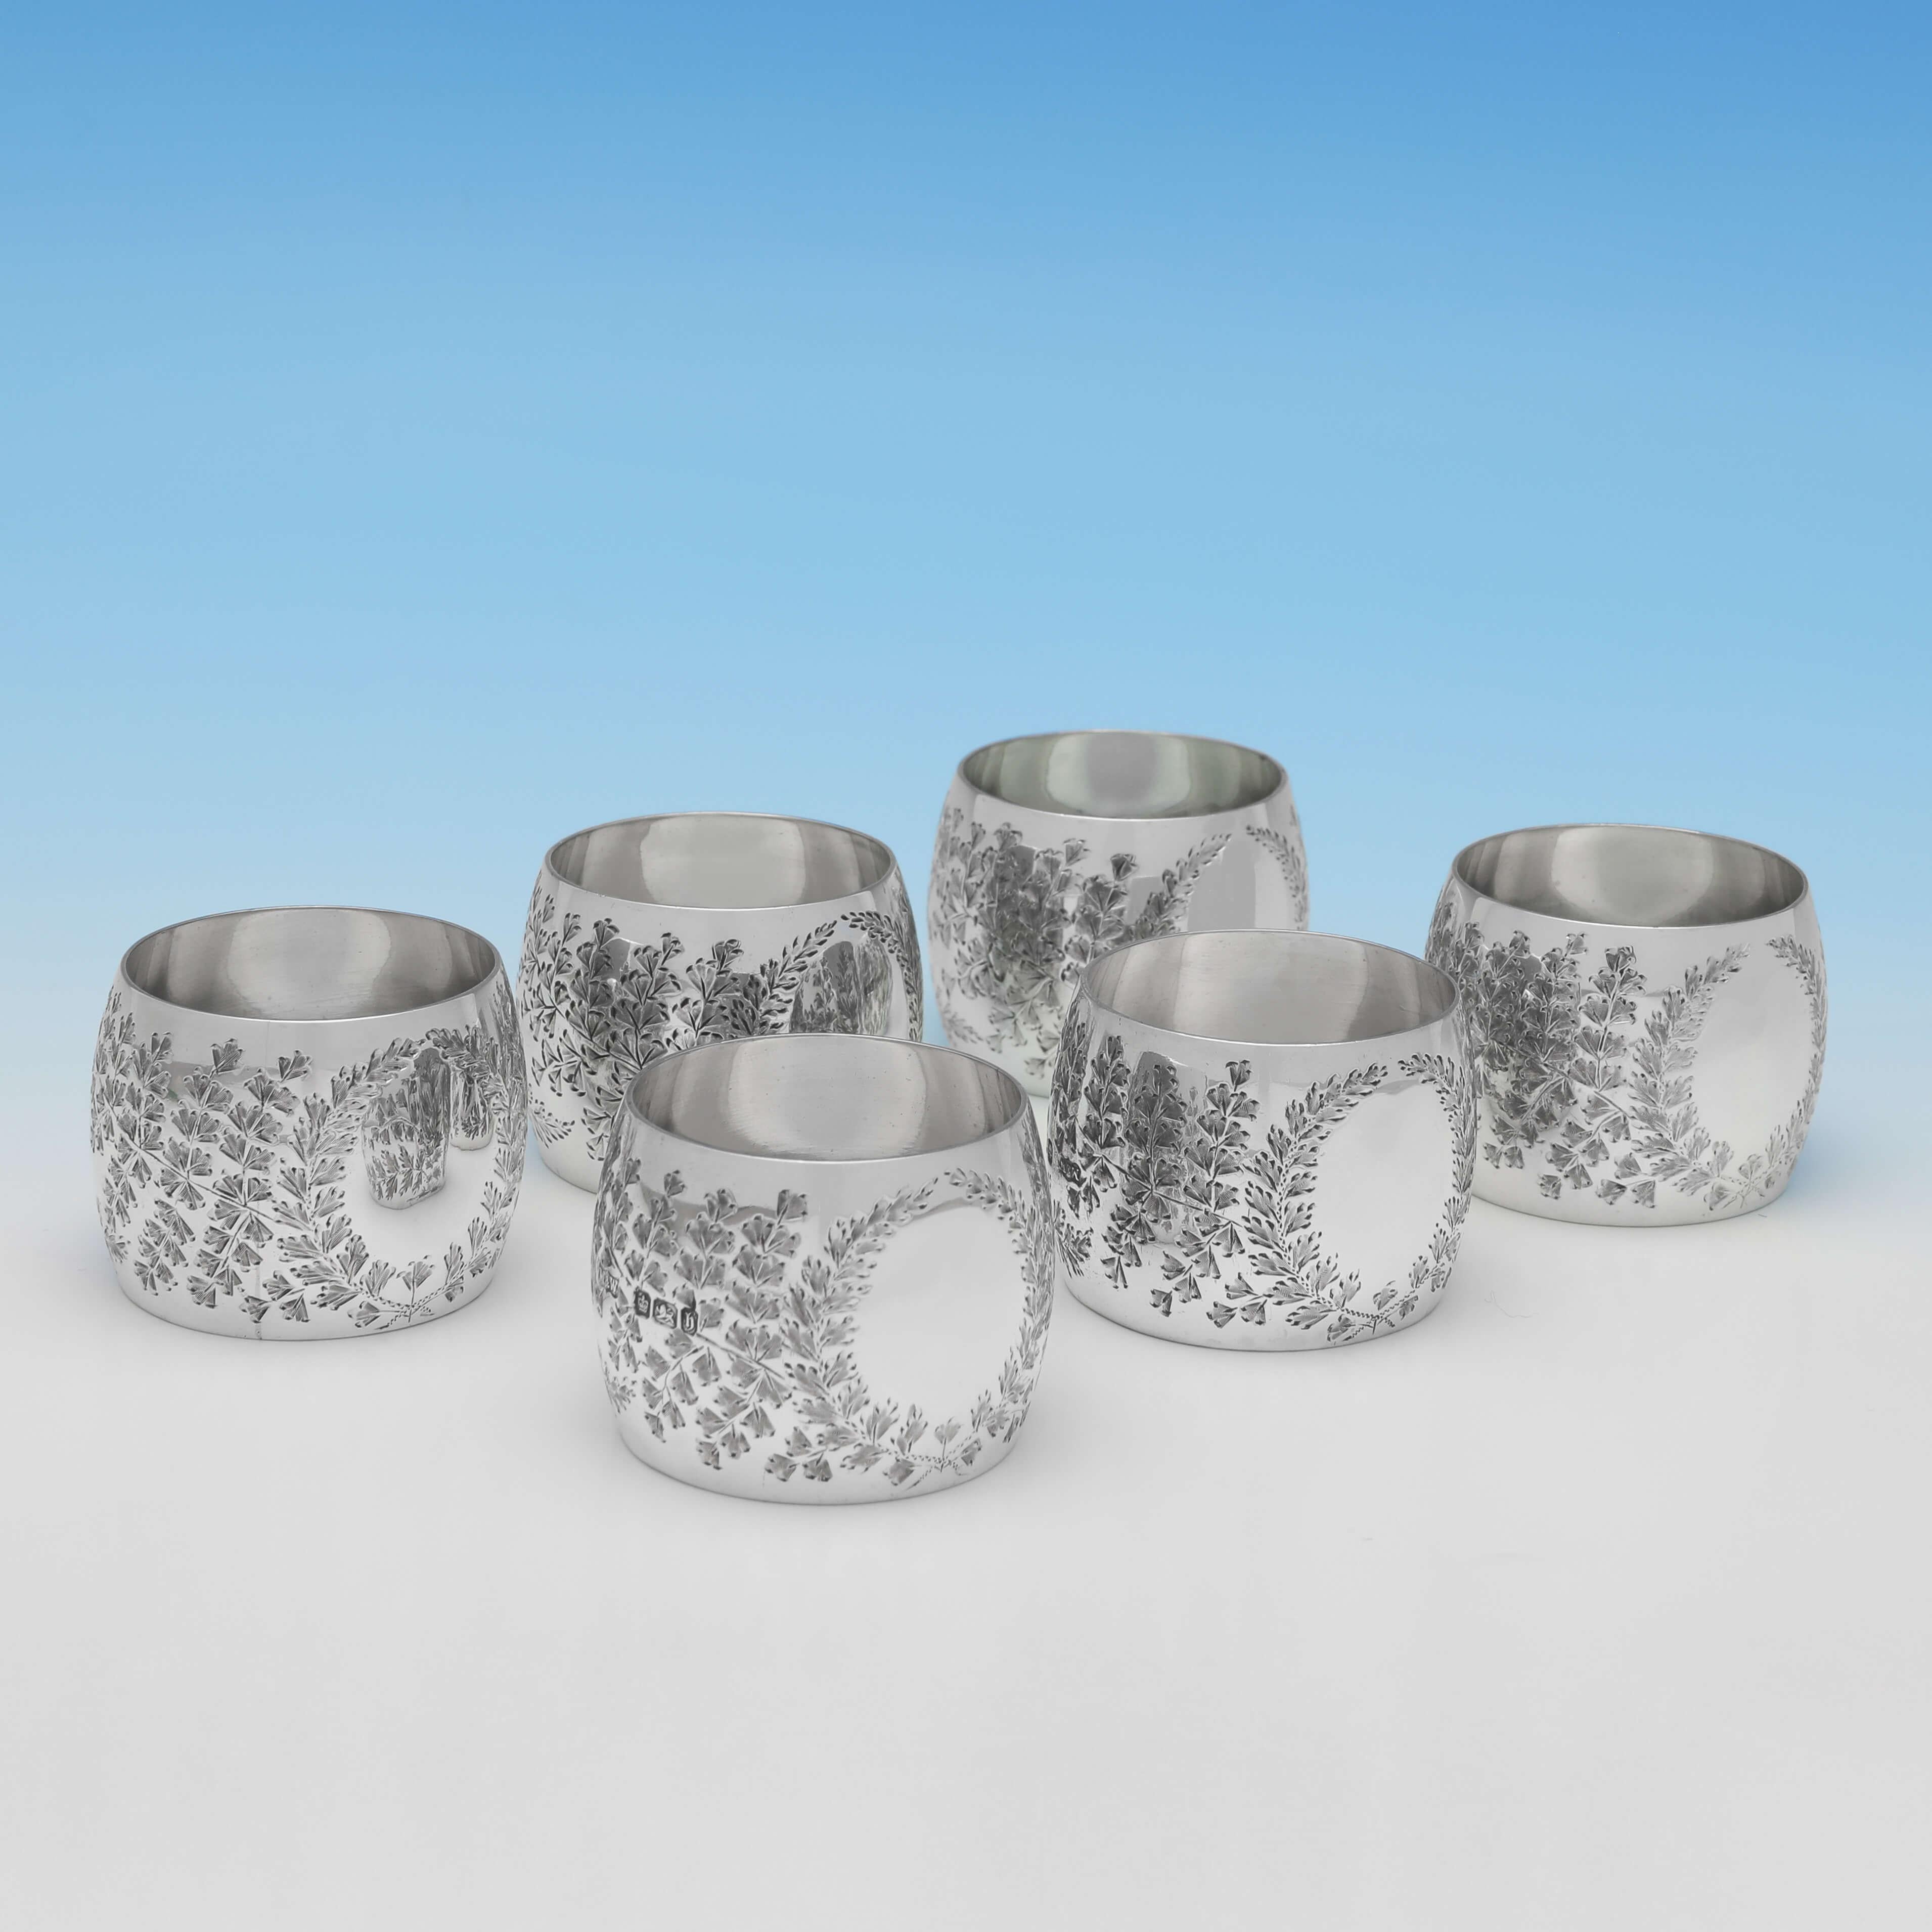 Hallmarked in Sheffield in 1900 by Mappin & Webb, this very attractive set of 6, Antique Sterling Silver Napkin Rings, are presented in their original box, and feature engraved decoration and vacant cartouches. Each napkin ring measures 1.25